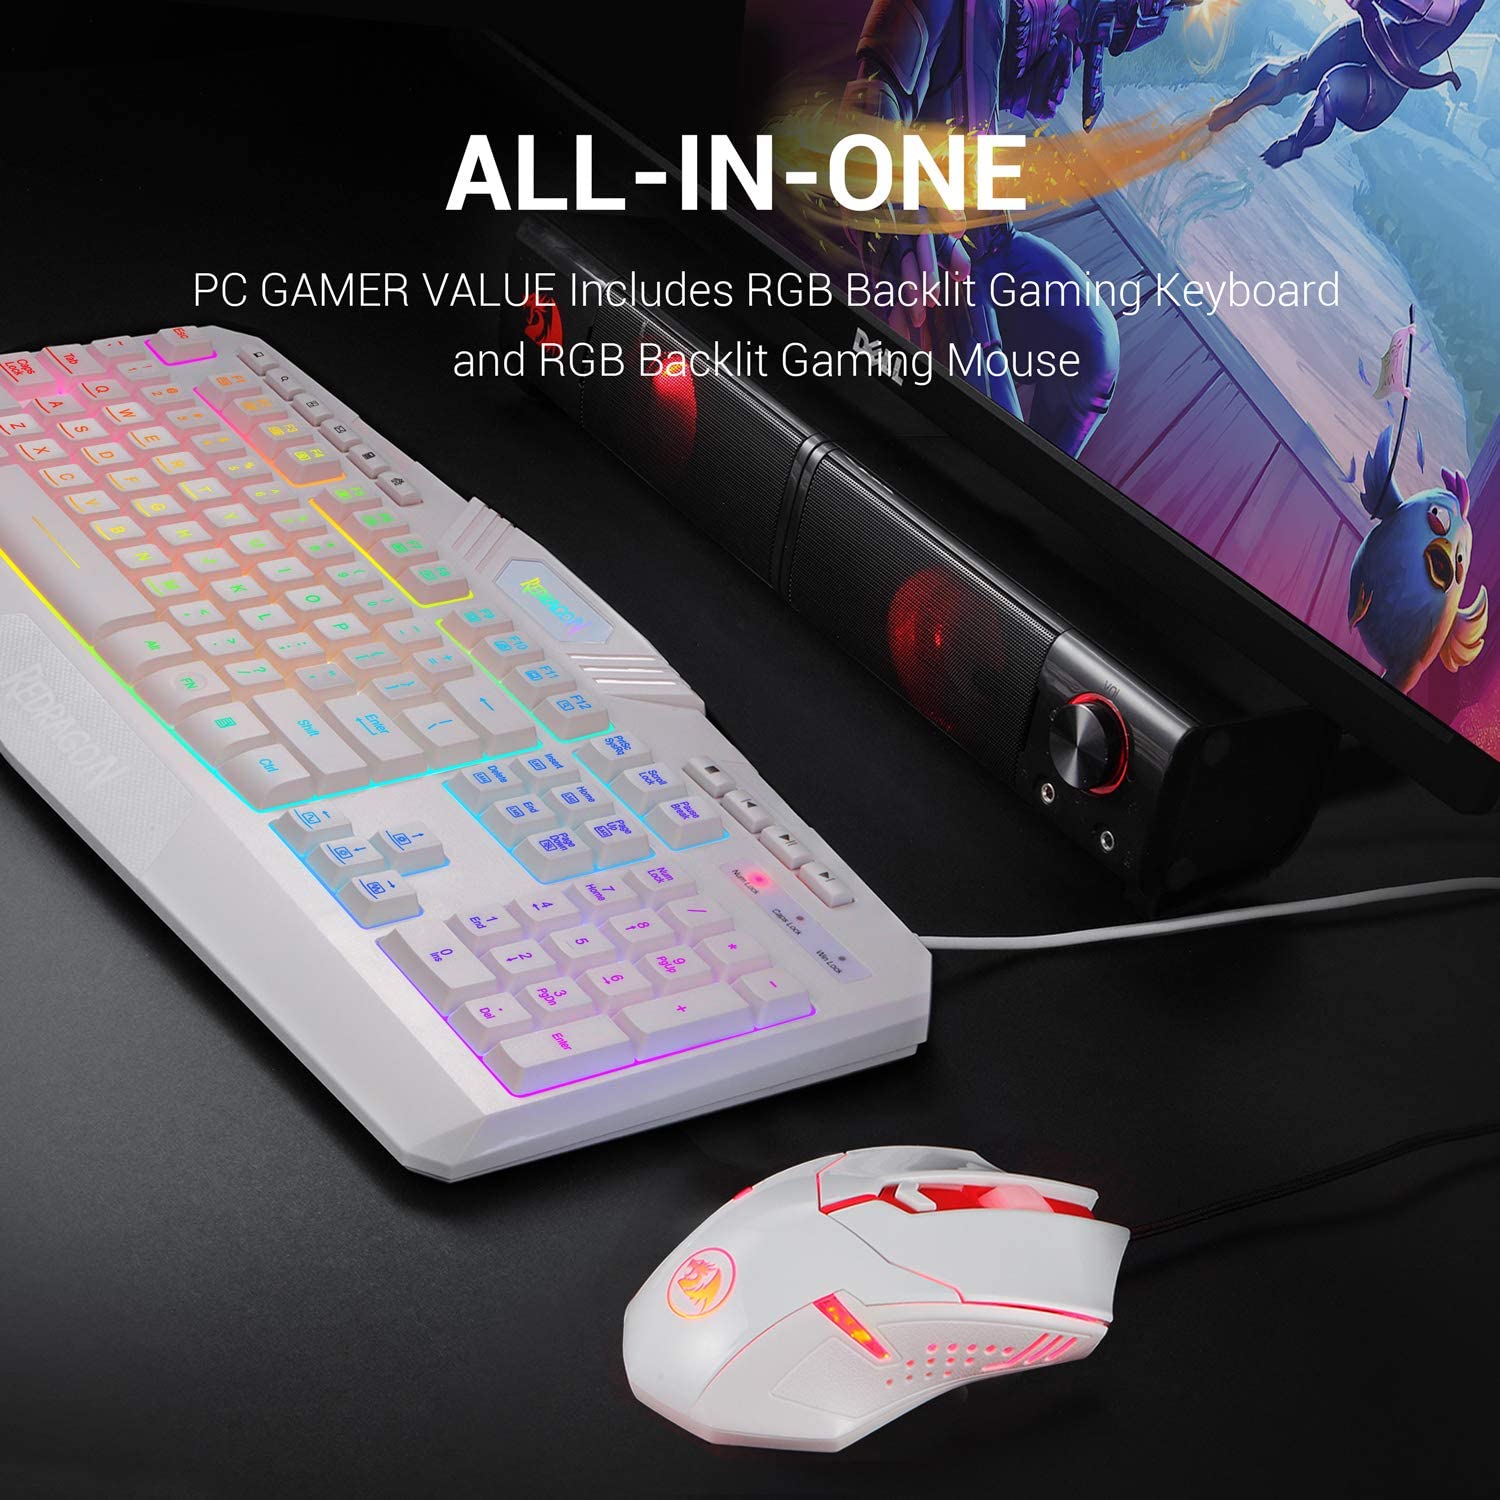 Redragon S101 Wired Gaming Keyboard and Mouse Combo RGB Backlit Gaming Keyboard